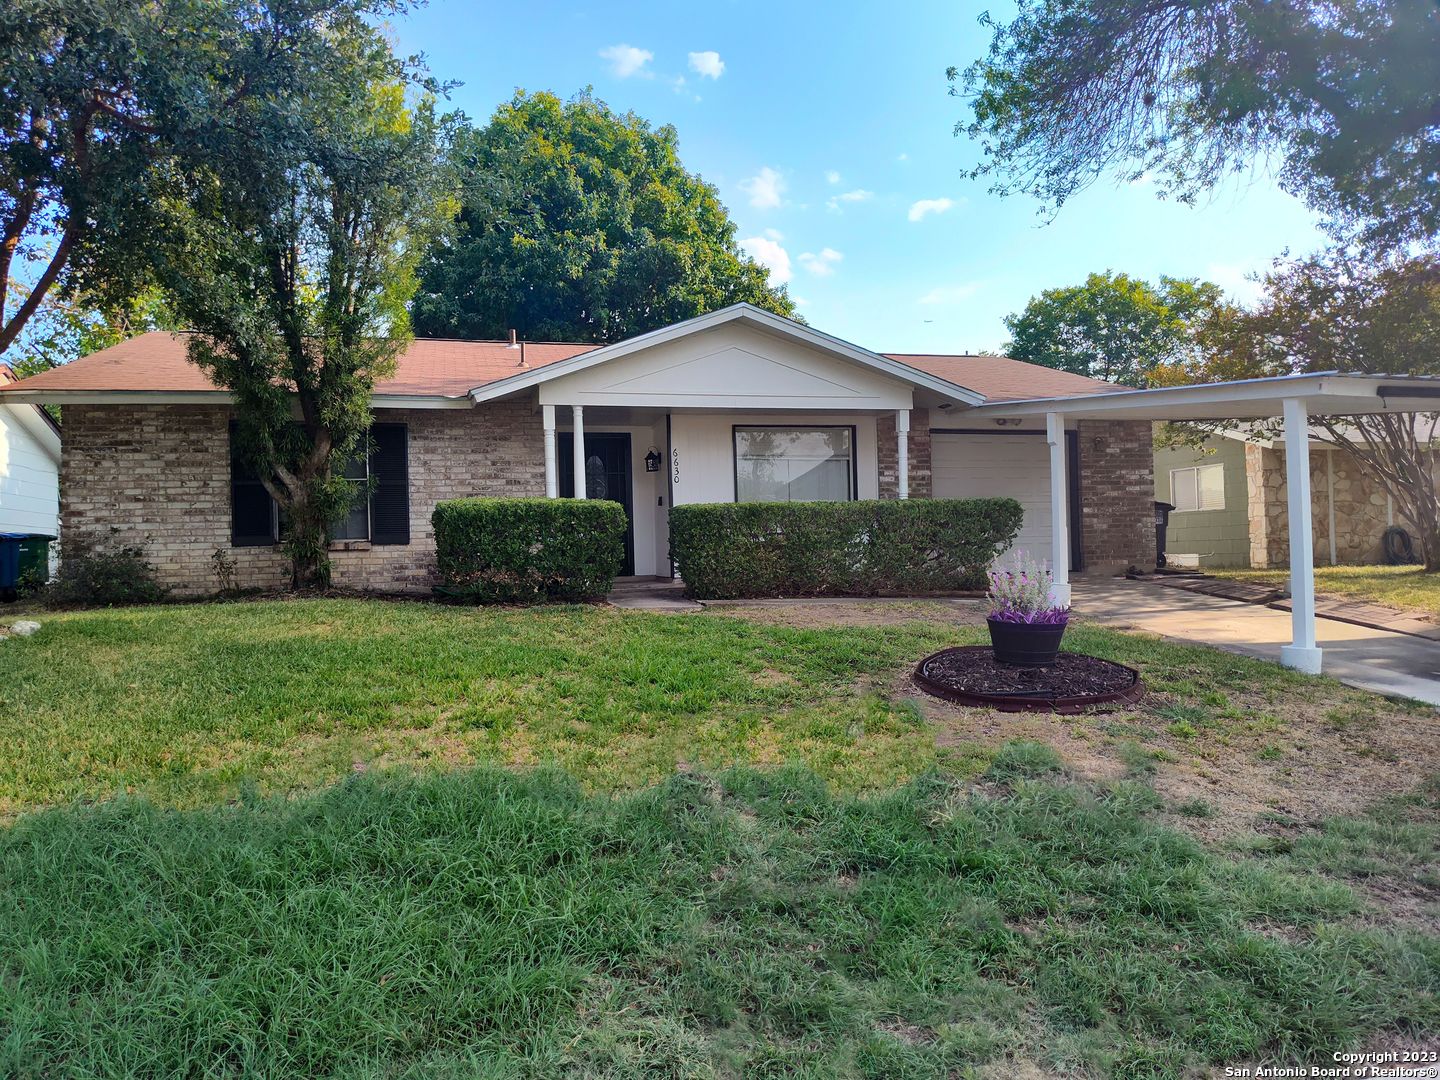 Photo of 6630 Spring Forest St in San Antonio, TX